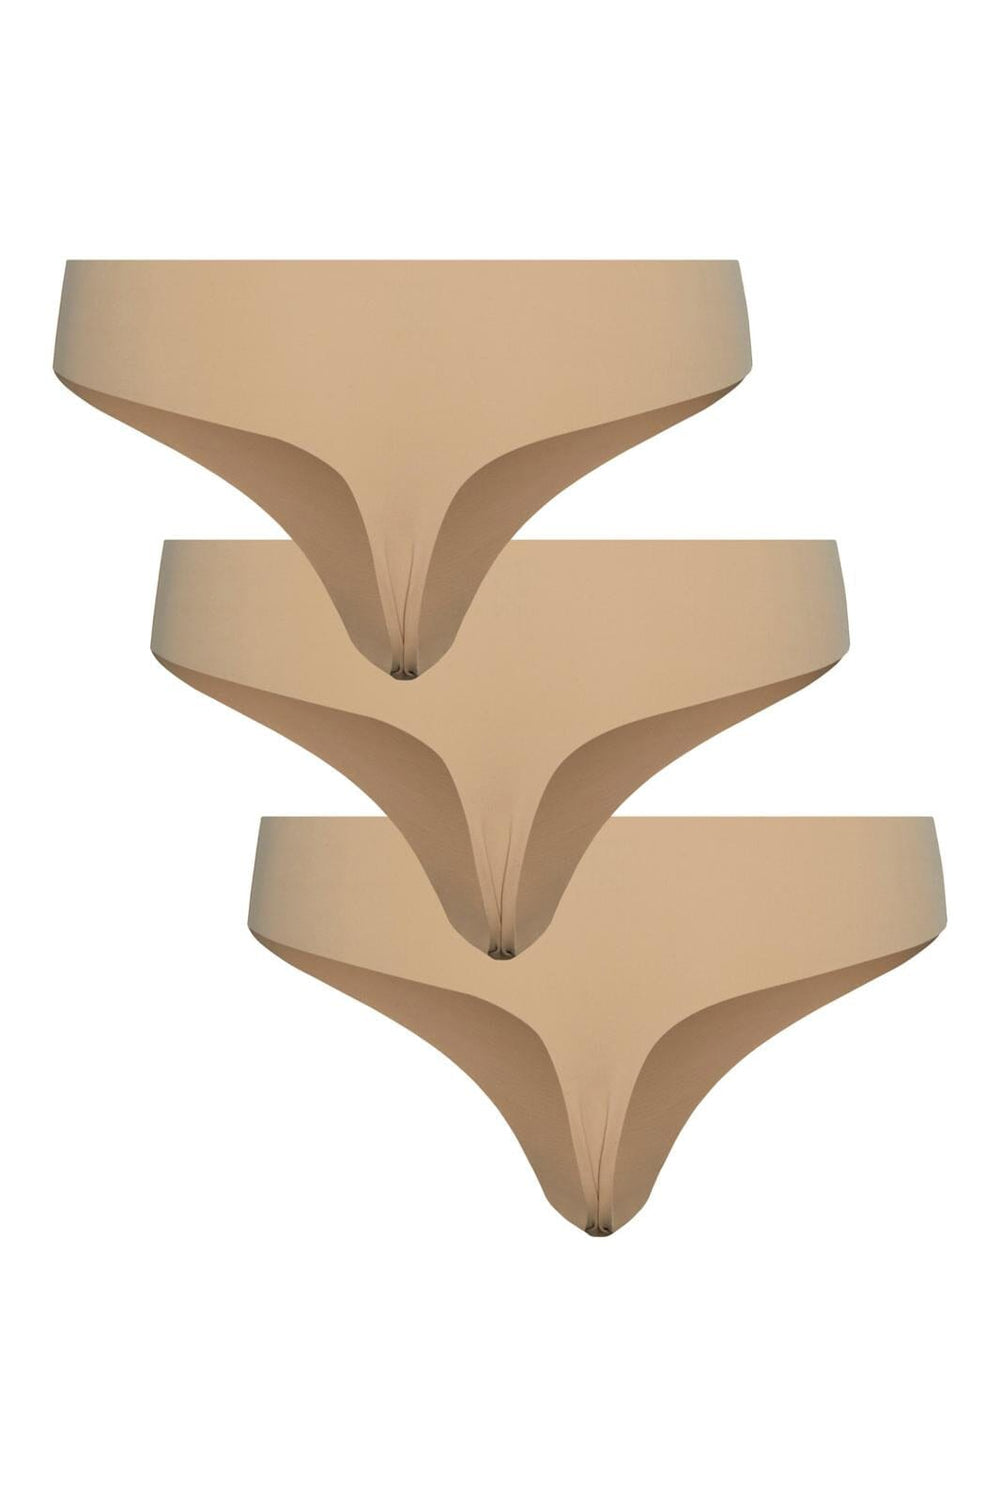 Pieces, Pcnamee Thong 3-Pack, Nude 3